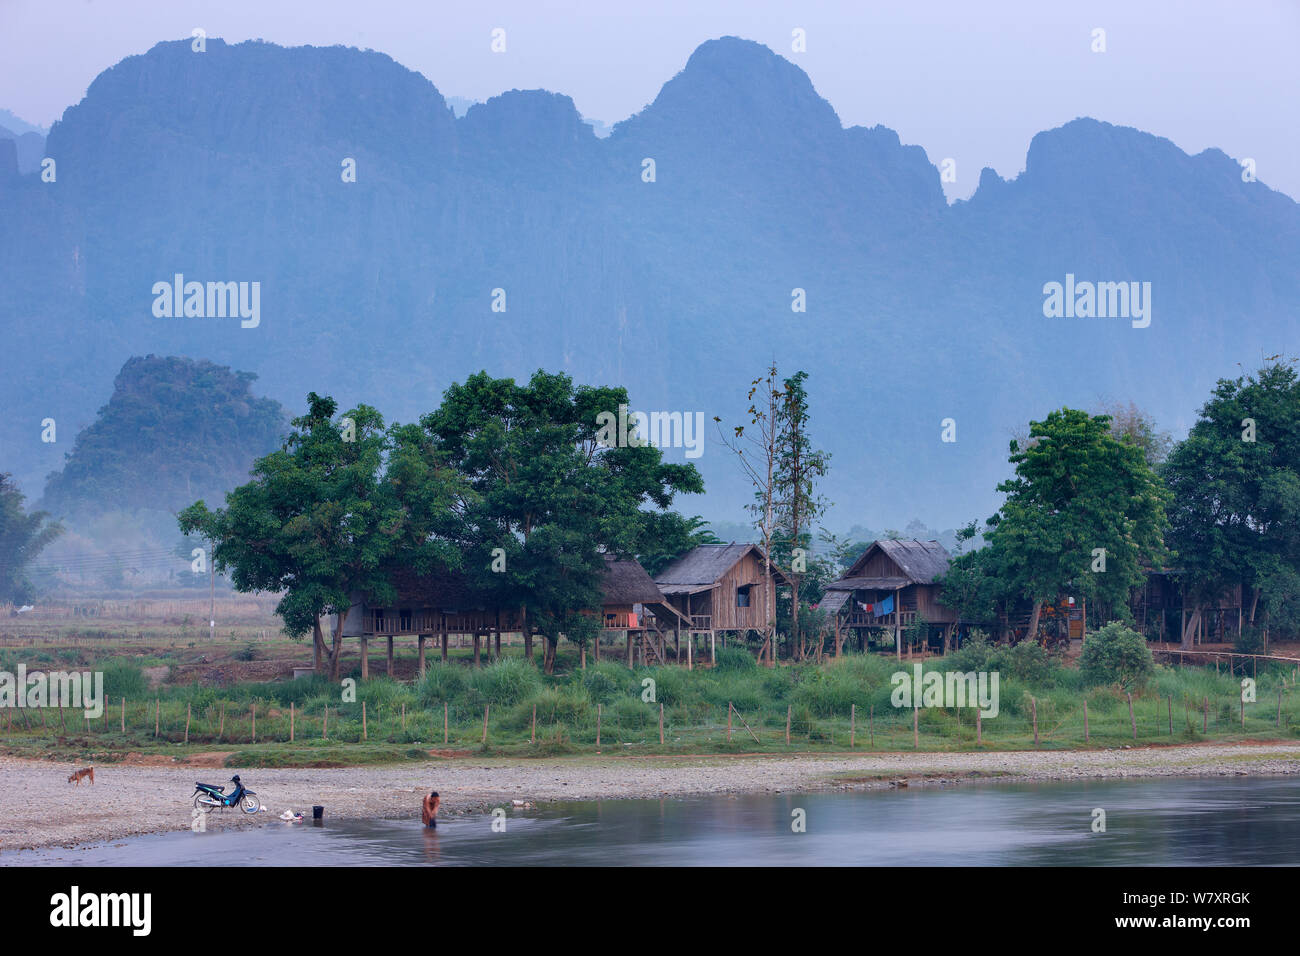 Huts on the shore of the Nam Song River, Vang Vieng, Laos, March 2009. Stock Photo